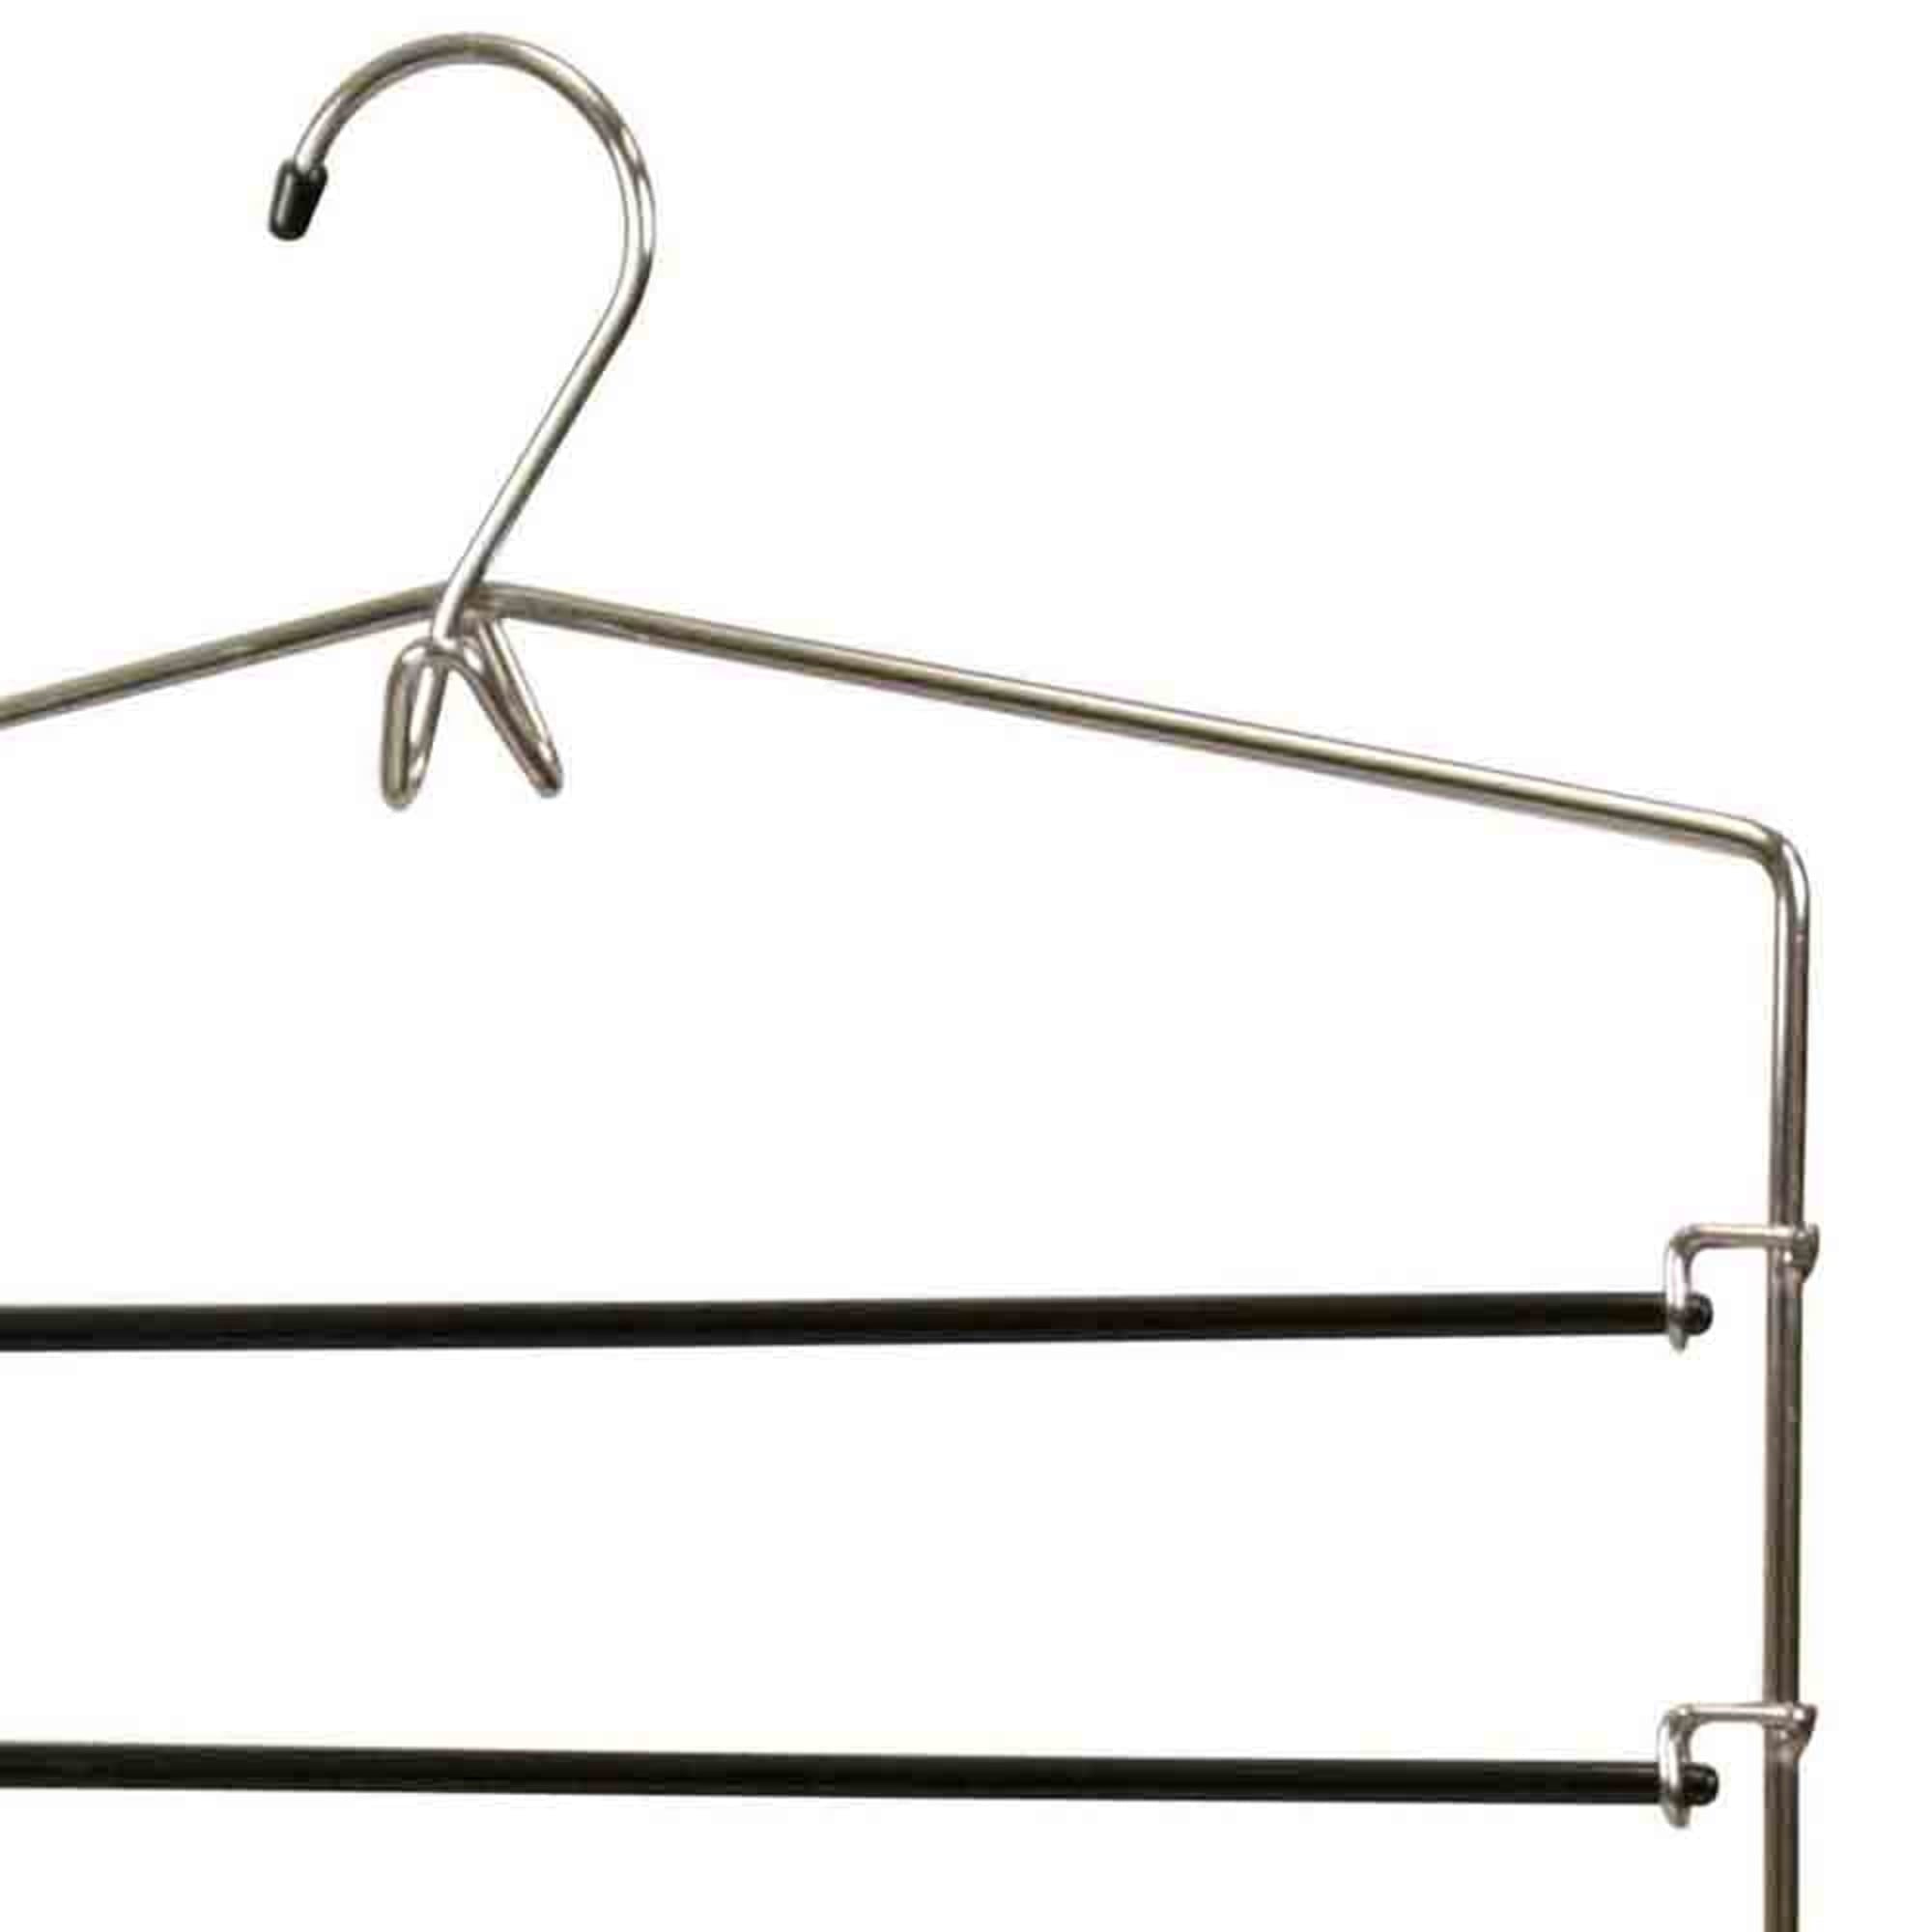 Home Basics 4 Tier Swinging Arm Trouser Hanger with Accessory Hook $5.00 EACH, CASE PACK OF 25